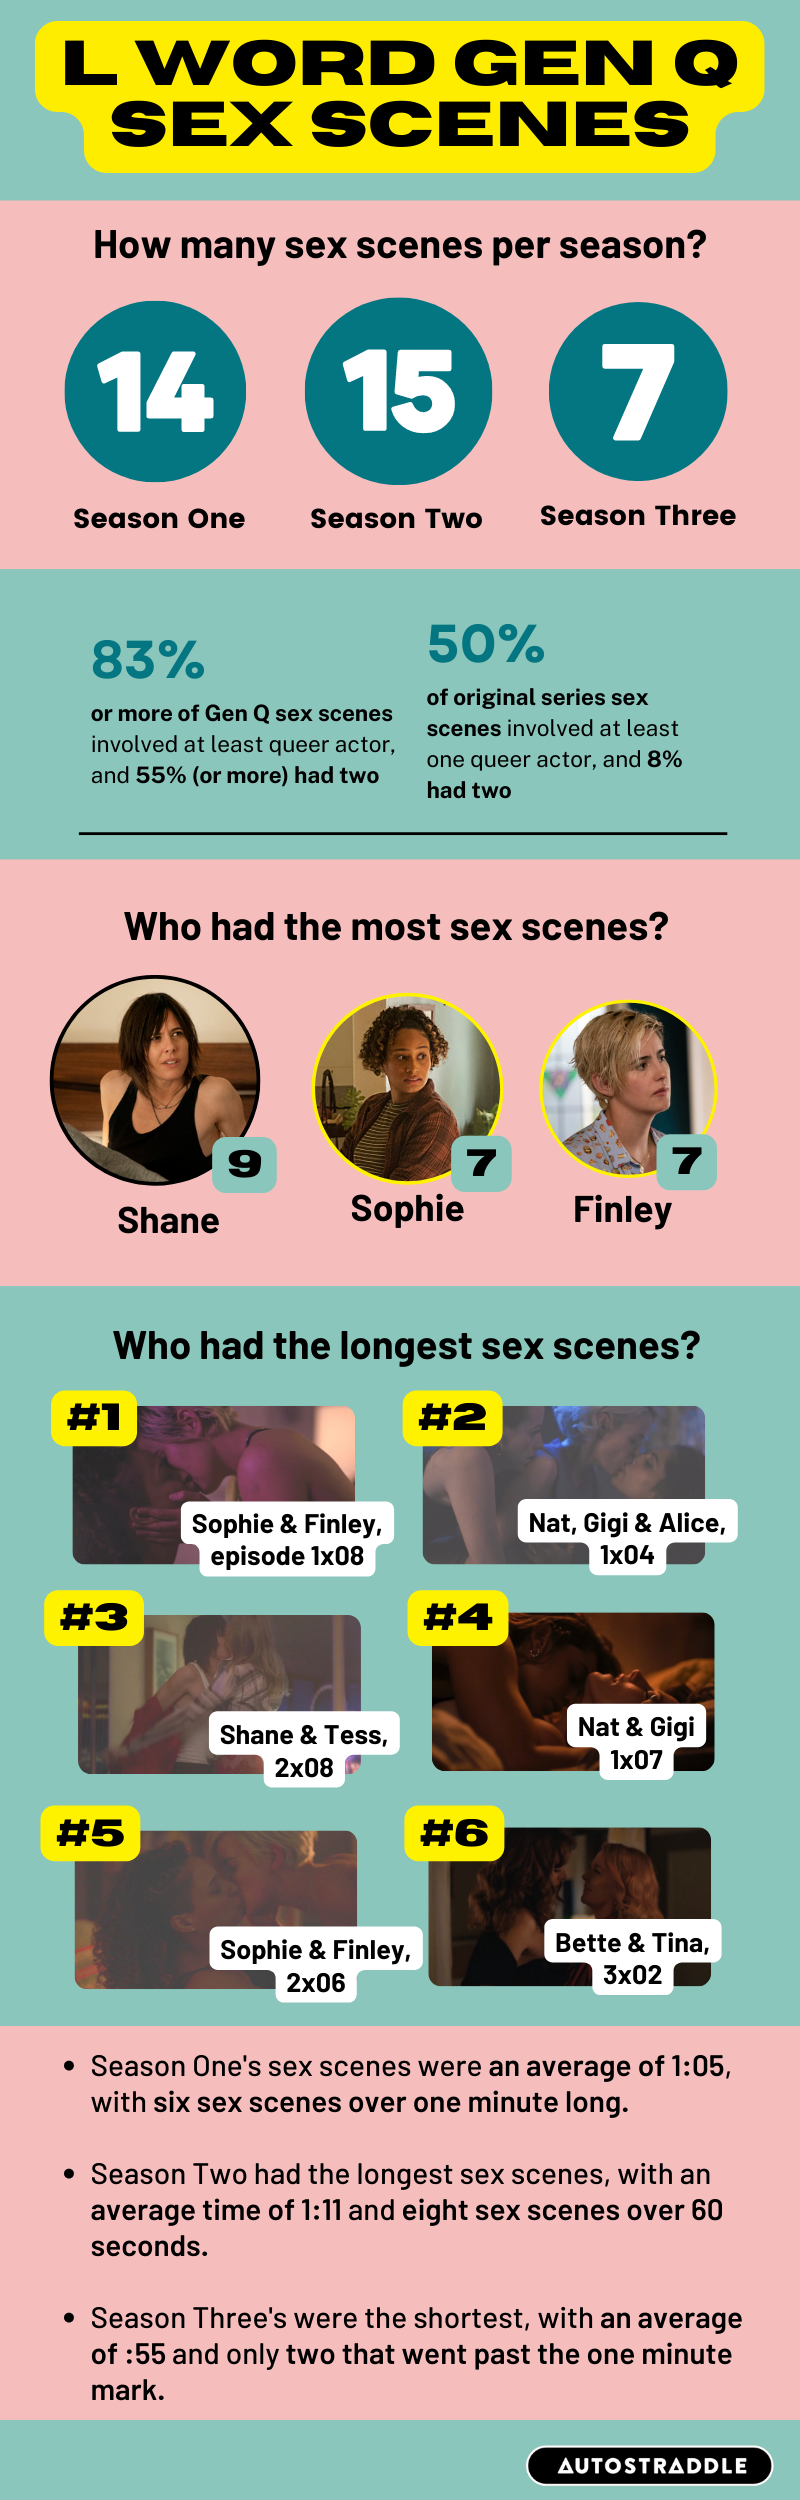 Generation Q sex scenes infographic. How Many Sex Scenes Per Season? 14 in Season 1, 15 in Season 2, 7 in Season 3. 83% or more of Gen Q sex scenes involved at least queer actor, and 55% (or more) had two. 50% of the original series sex scenes involved at least one queer actor, and 8% had two. Who had the most sex scenes? Shane - 9, Sophie - 7, Finley - 7. Who had the longest sex scenes? #1: Sophie & Finley, Episode 1x08, #2: Nat, Gigi & Alice, Episode 1x04. #3: Shane & Tess, Episode 2x08. #4: Nat & Gigi, Episode 1x07. #5: Sophie & Finley, Episode 2x06, #6: Bette & Tina, Episode 3x02. Season One's sex scenes were an average of 1:05, with six sex scenes over one minute long. Season Two had the longest sex scenes, with an average time of 1:11 and eight sex scenes over 60 seconds. Season Three's were the shortest, with an average of :55 and only two that went past the one minute mark.